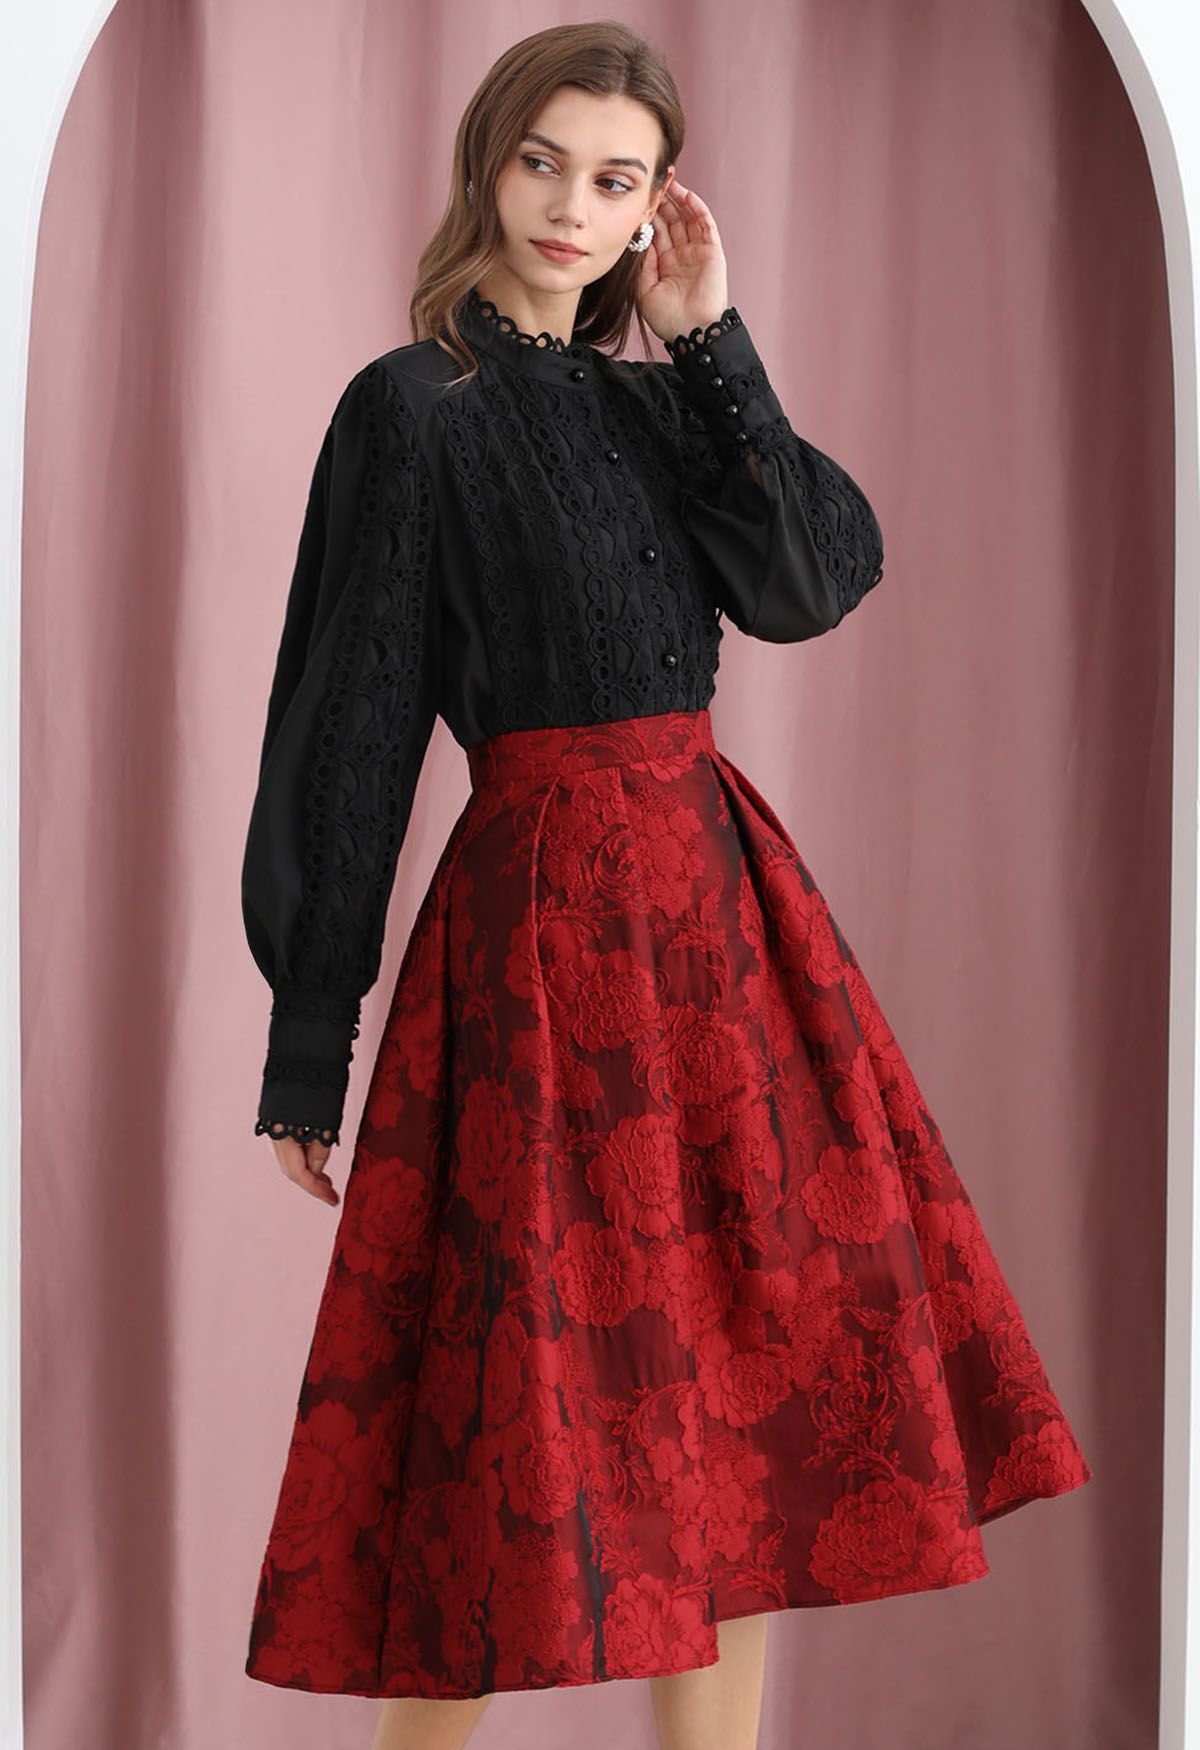 Blissful Red Floral Jacquard Pleated Midi Skirt